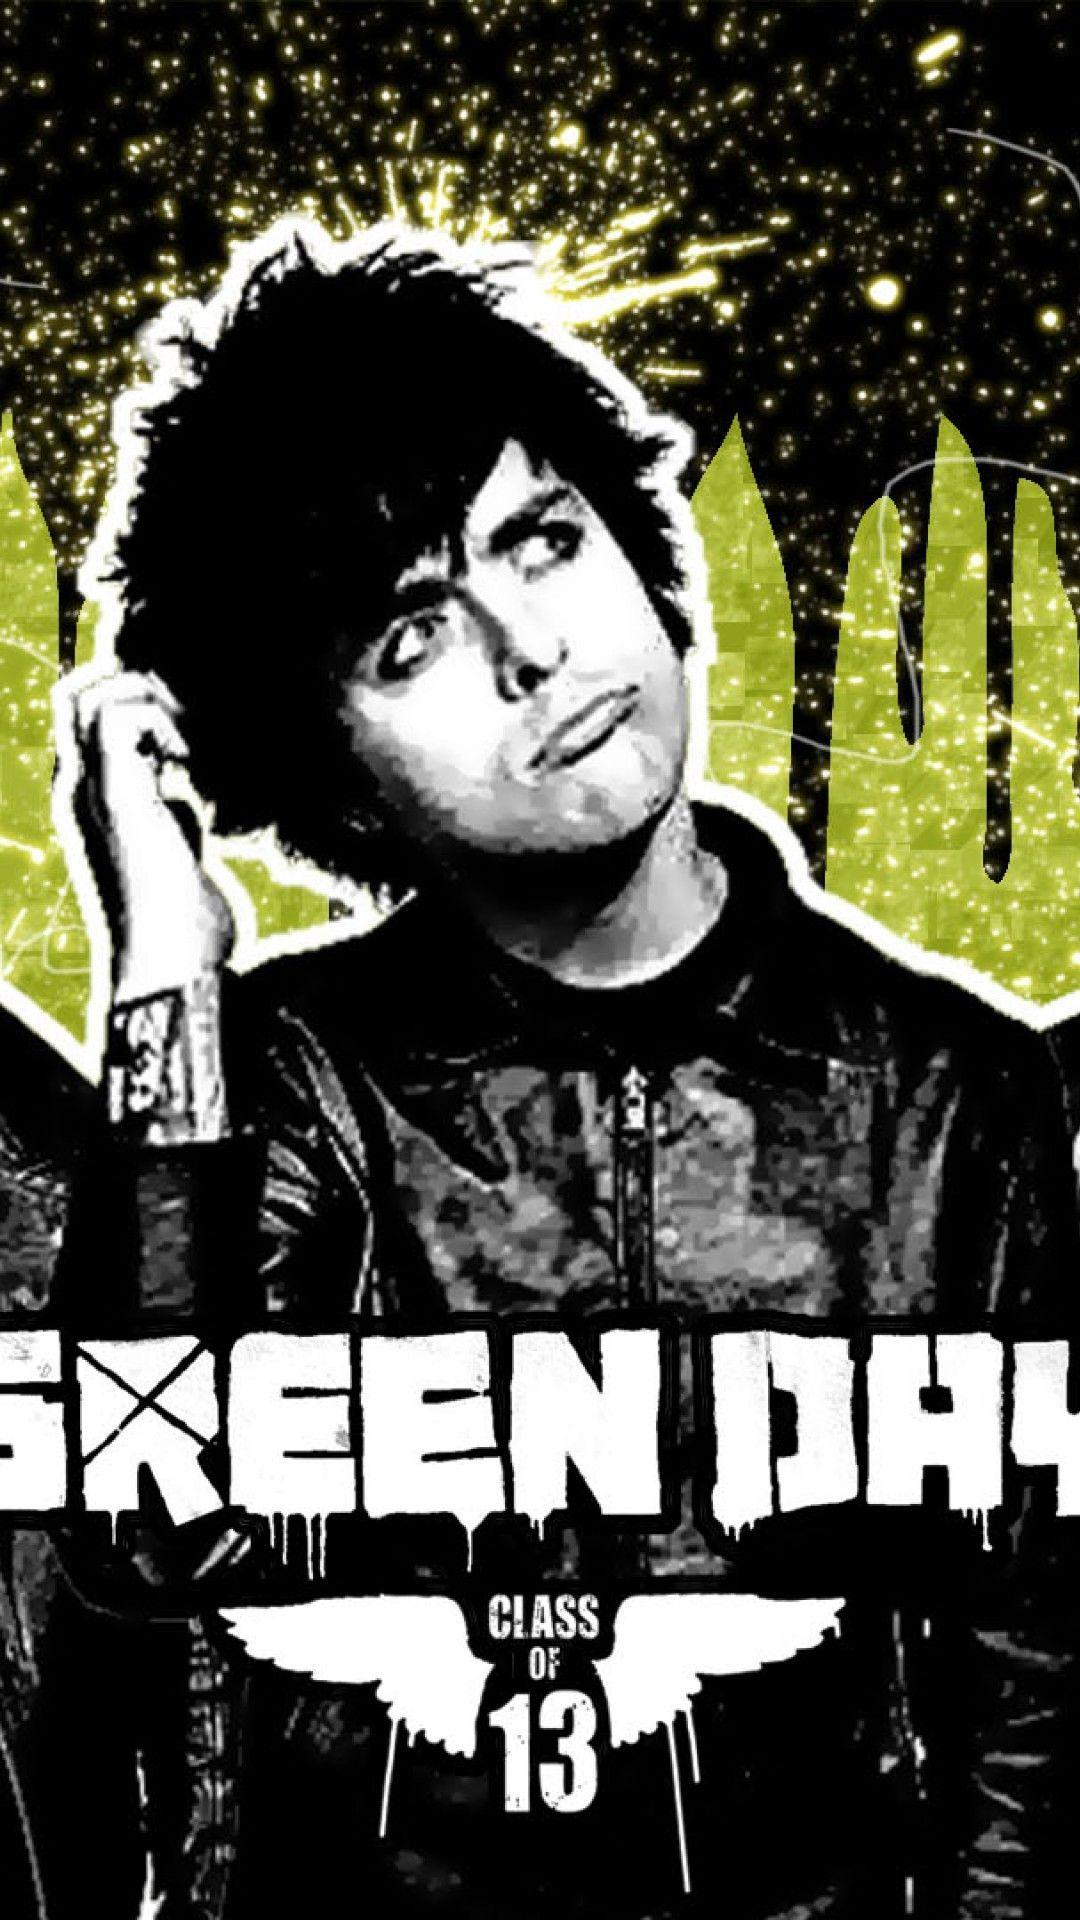 Green Day Wallpaper for iPhone iPhone 7 plus, iPhone 6 plus